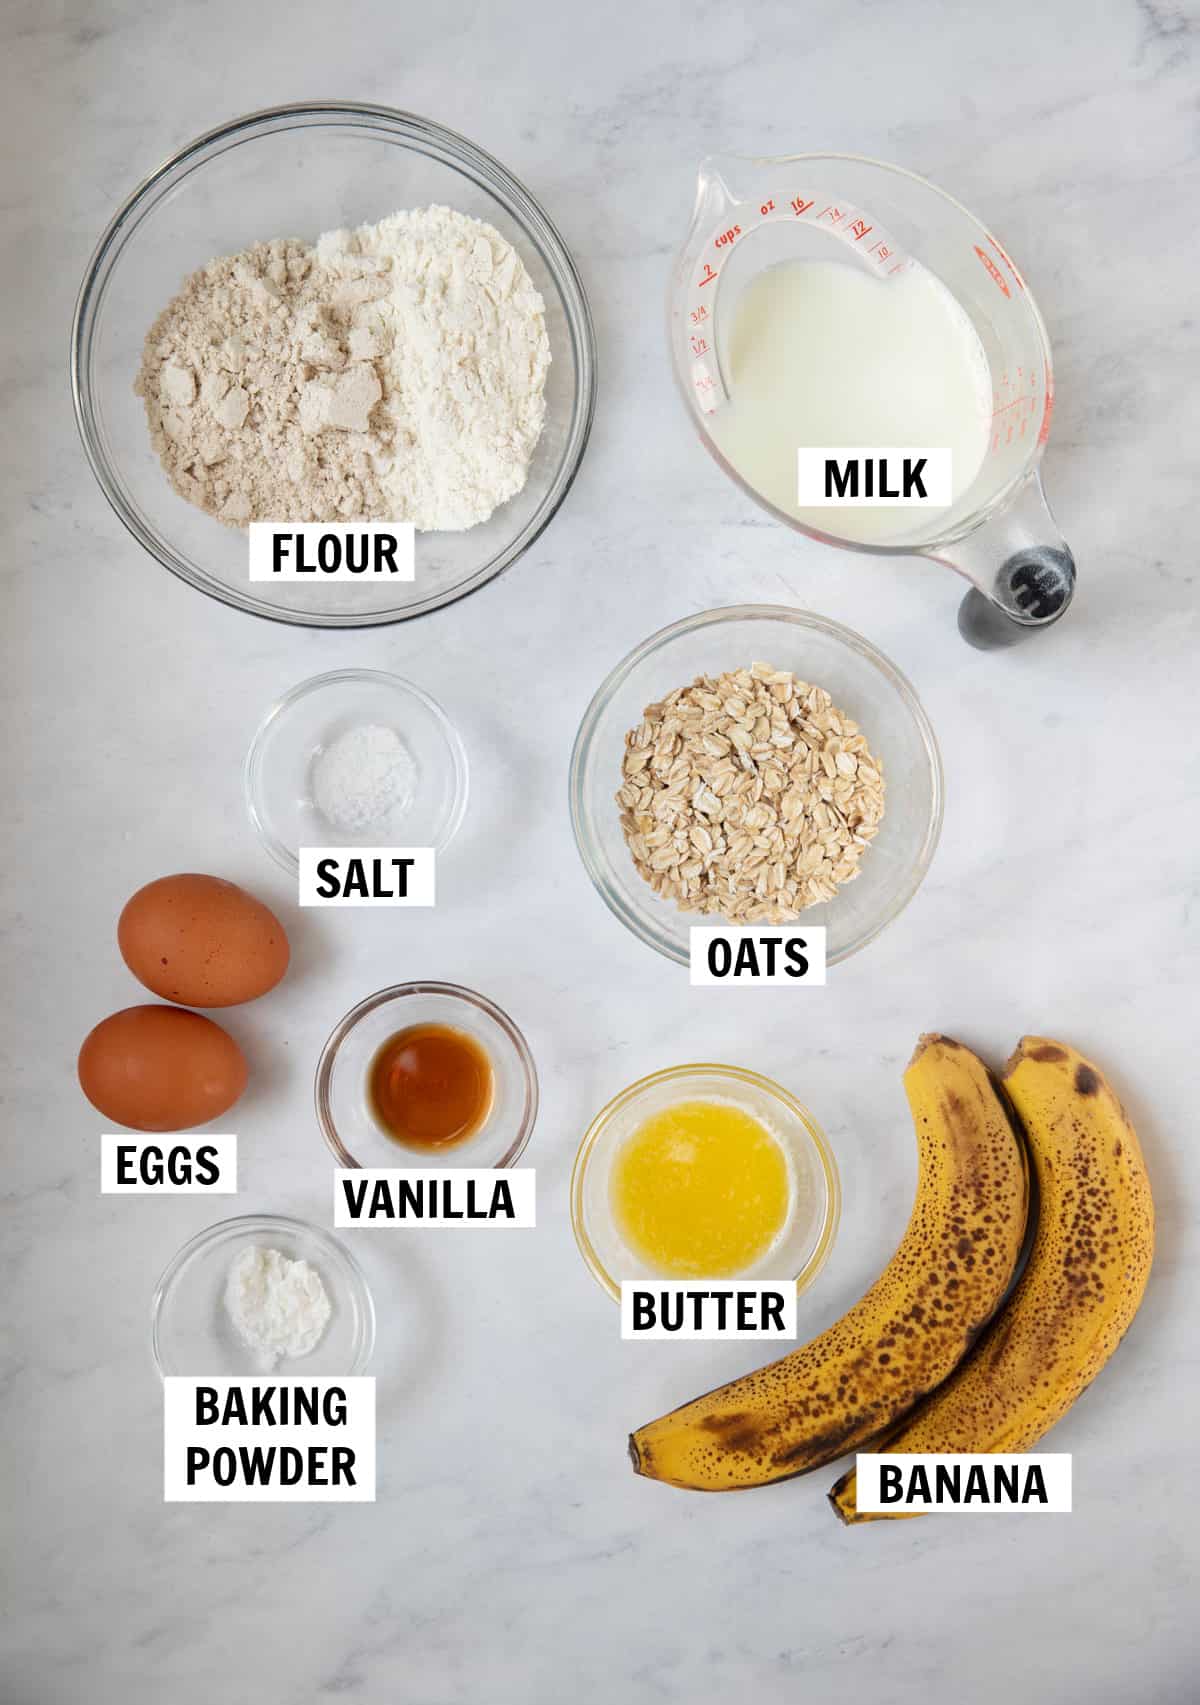 All of the ingredients for banana oat pancakes on a white countertop including oat flour, all purpose flour, oats, salt, baking powder, eggs, melted butter, banana, milk and vanilla extract.